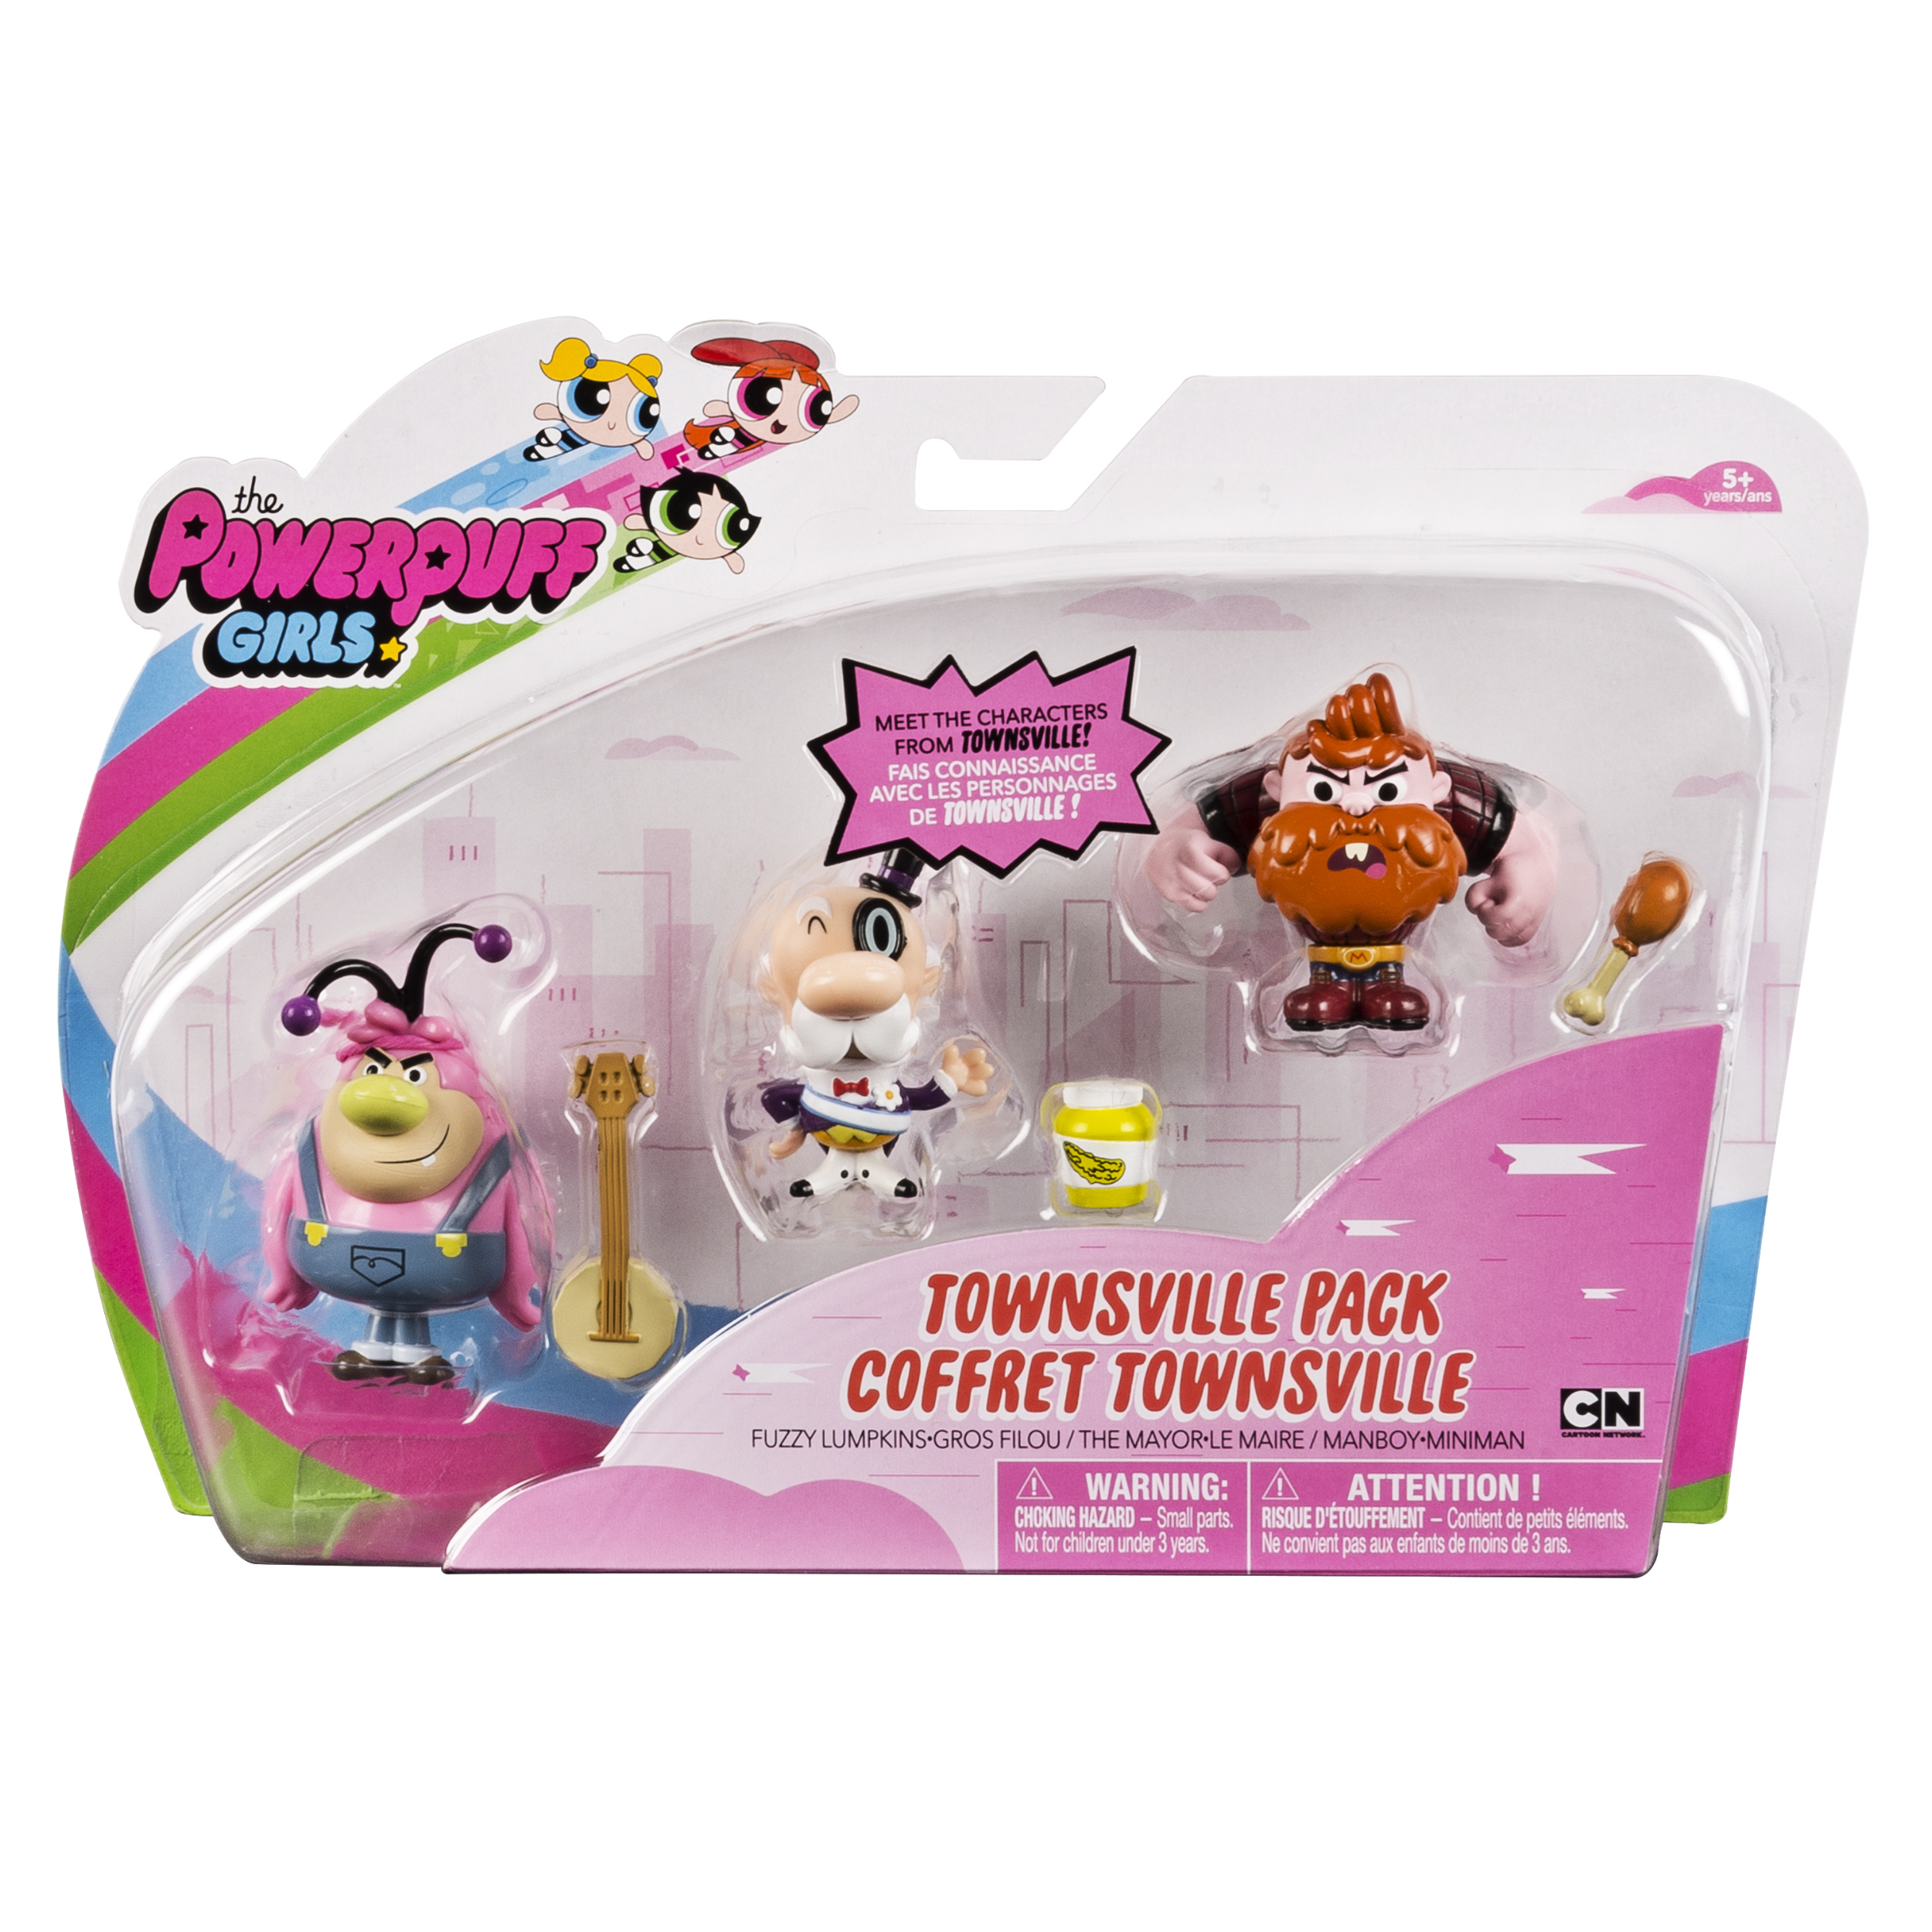 The Powerpuff Girls, Townsville Pack, Action Figures, Walmart Exclusive by Spin Master - image 2 of 2